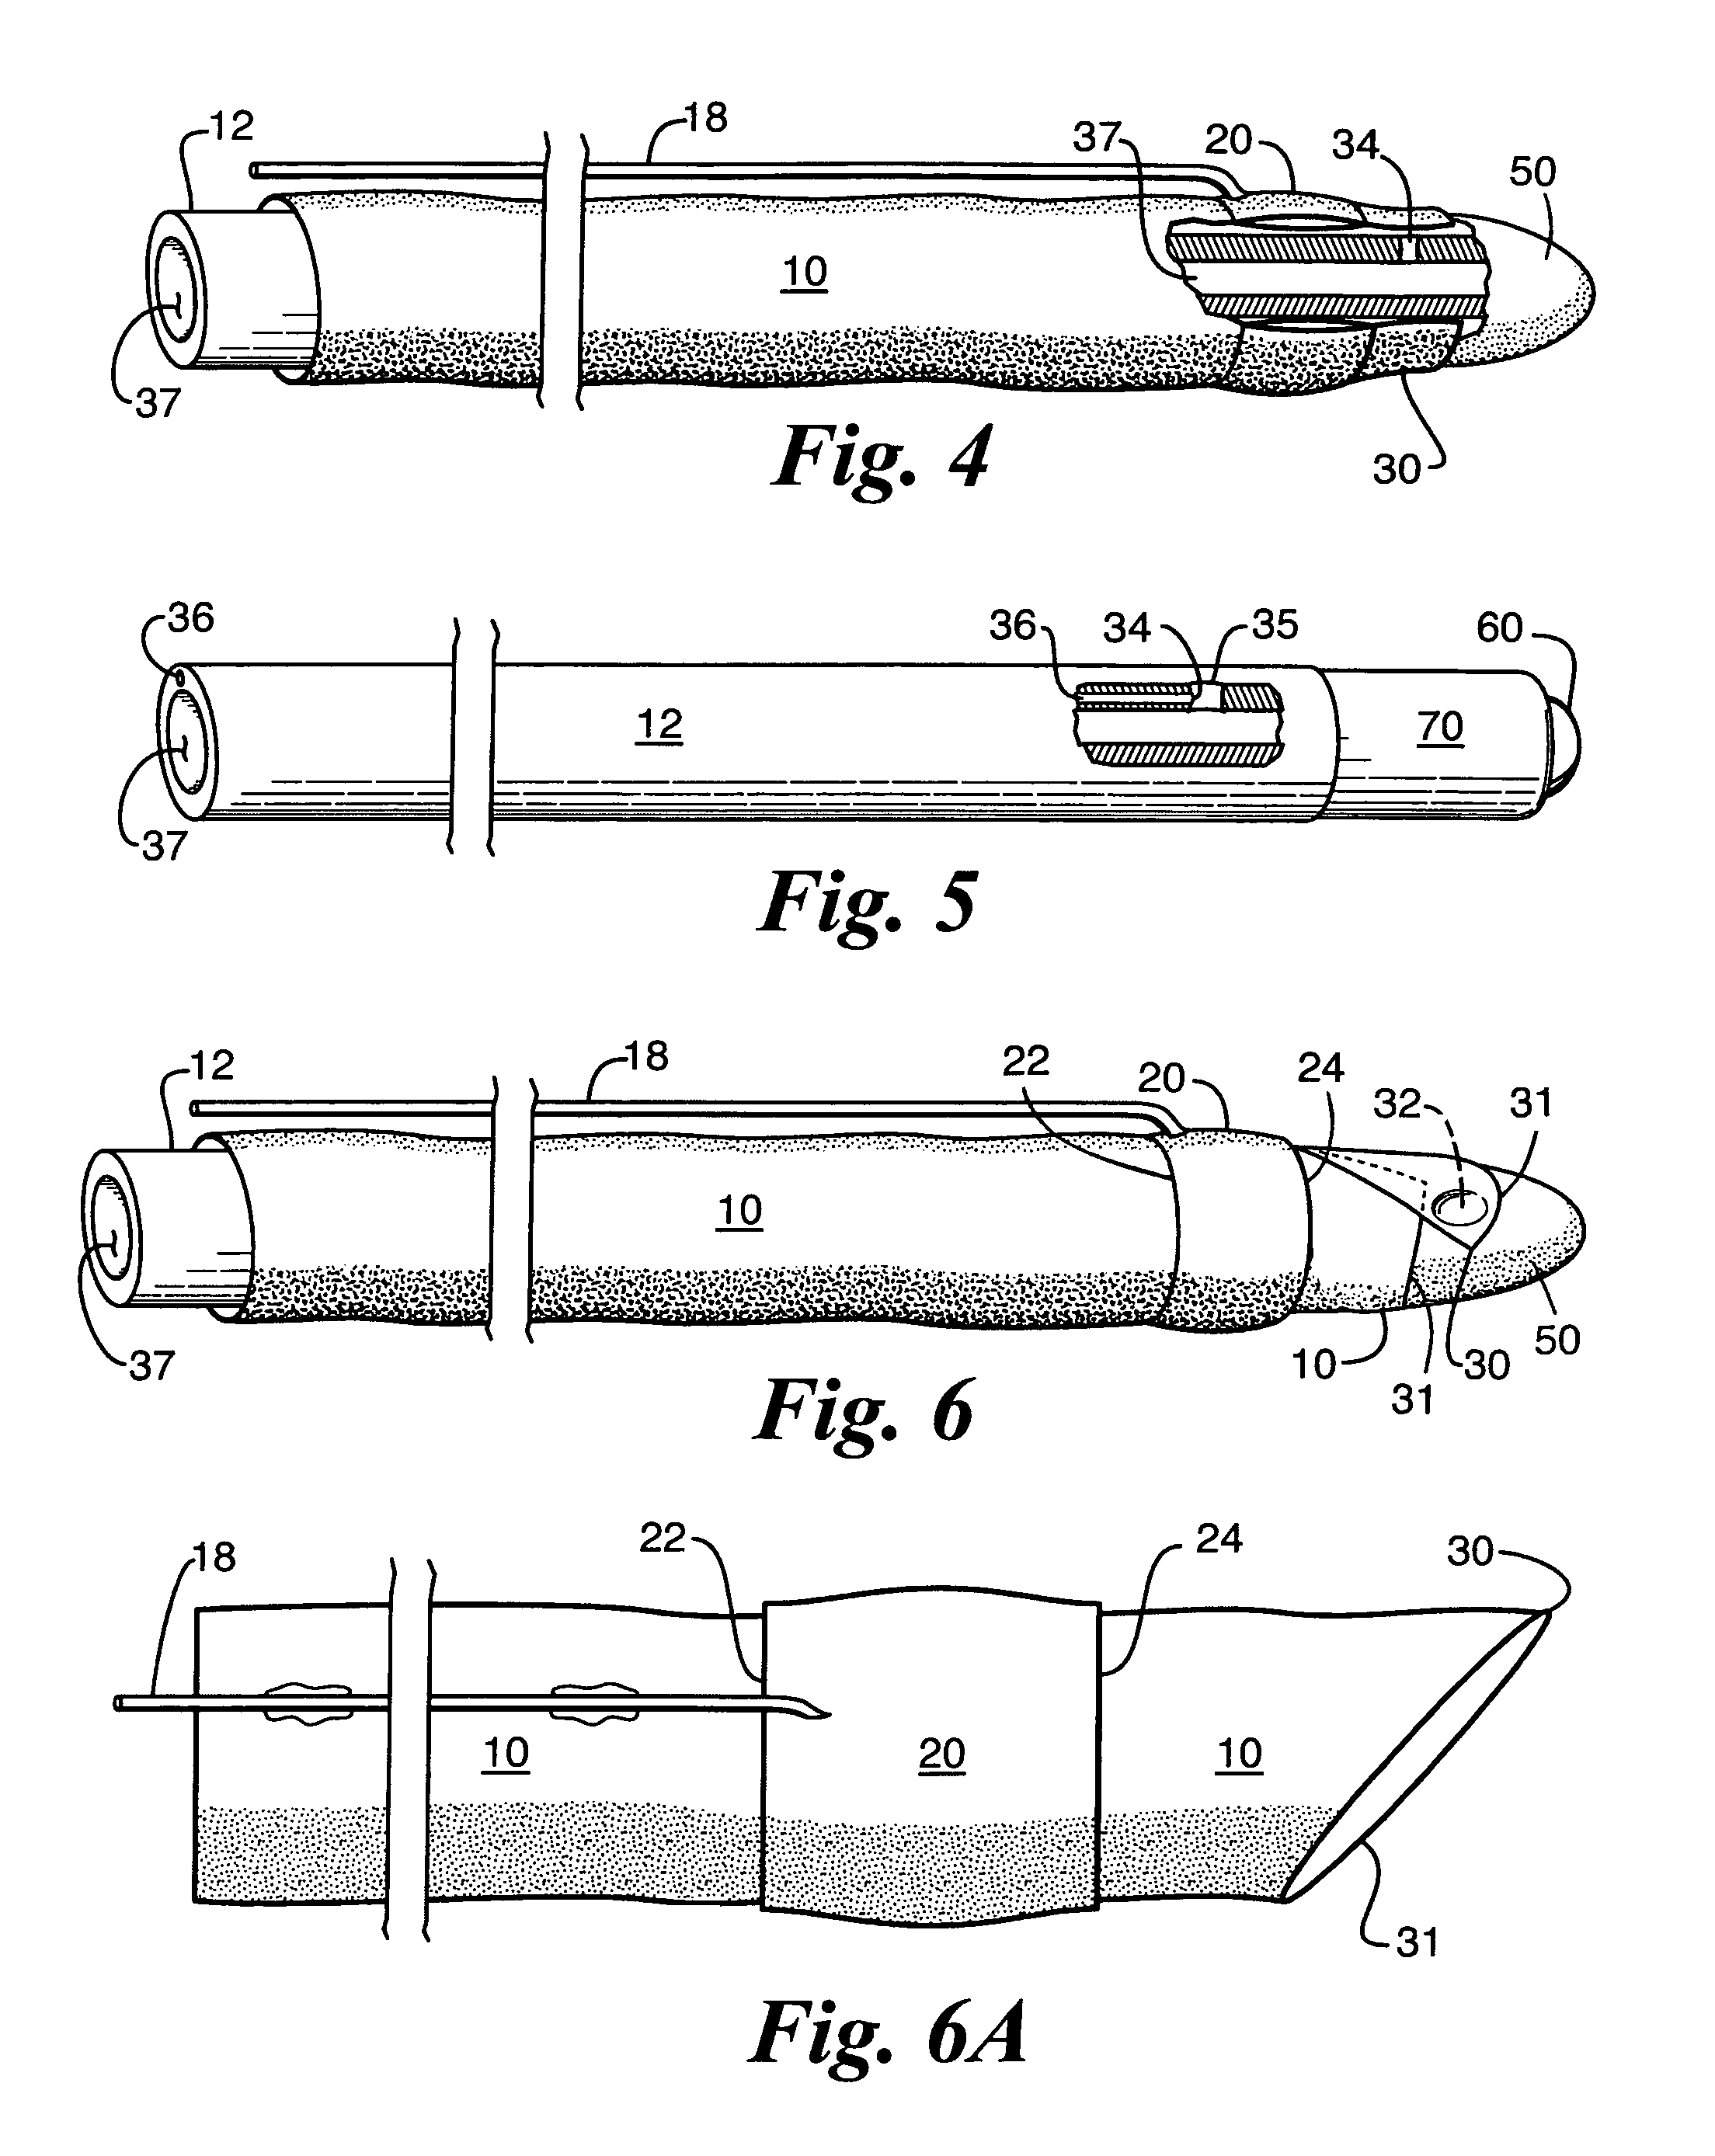 Flaccid tubular membrane and insertion appliance for surgical intubation and method